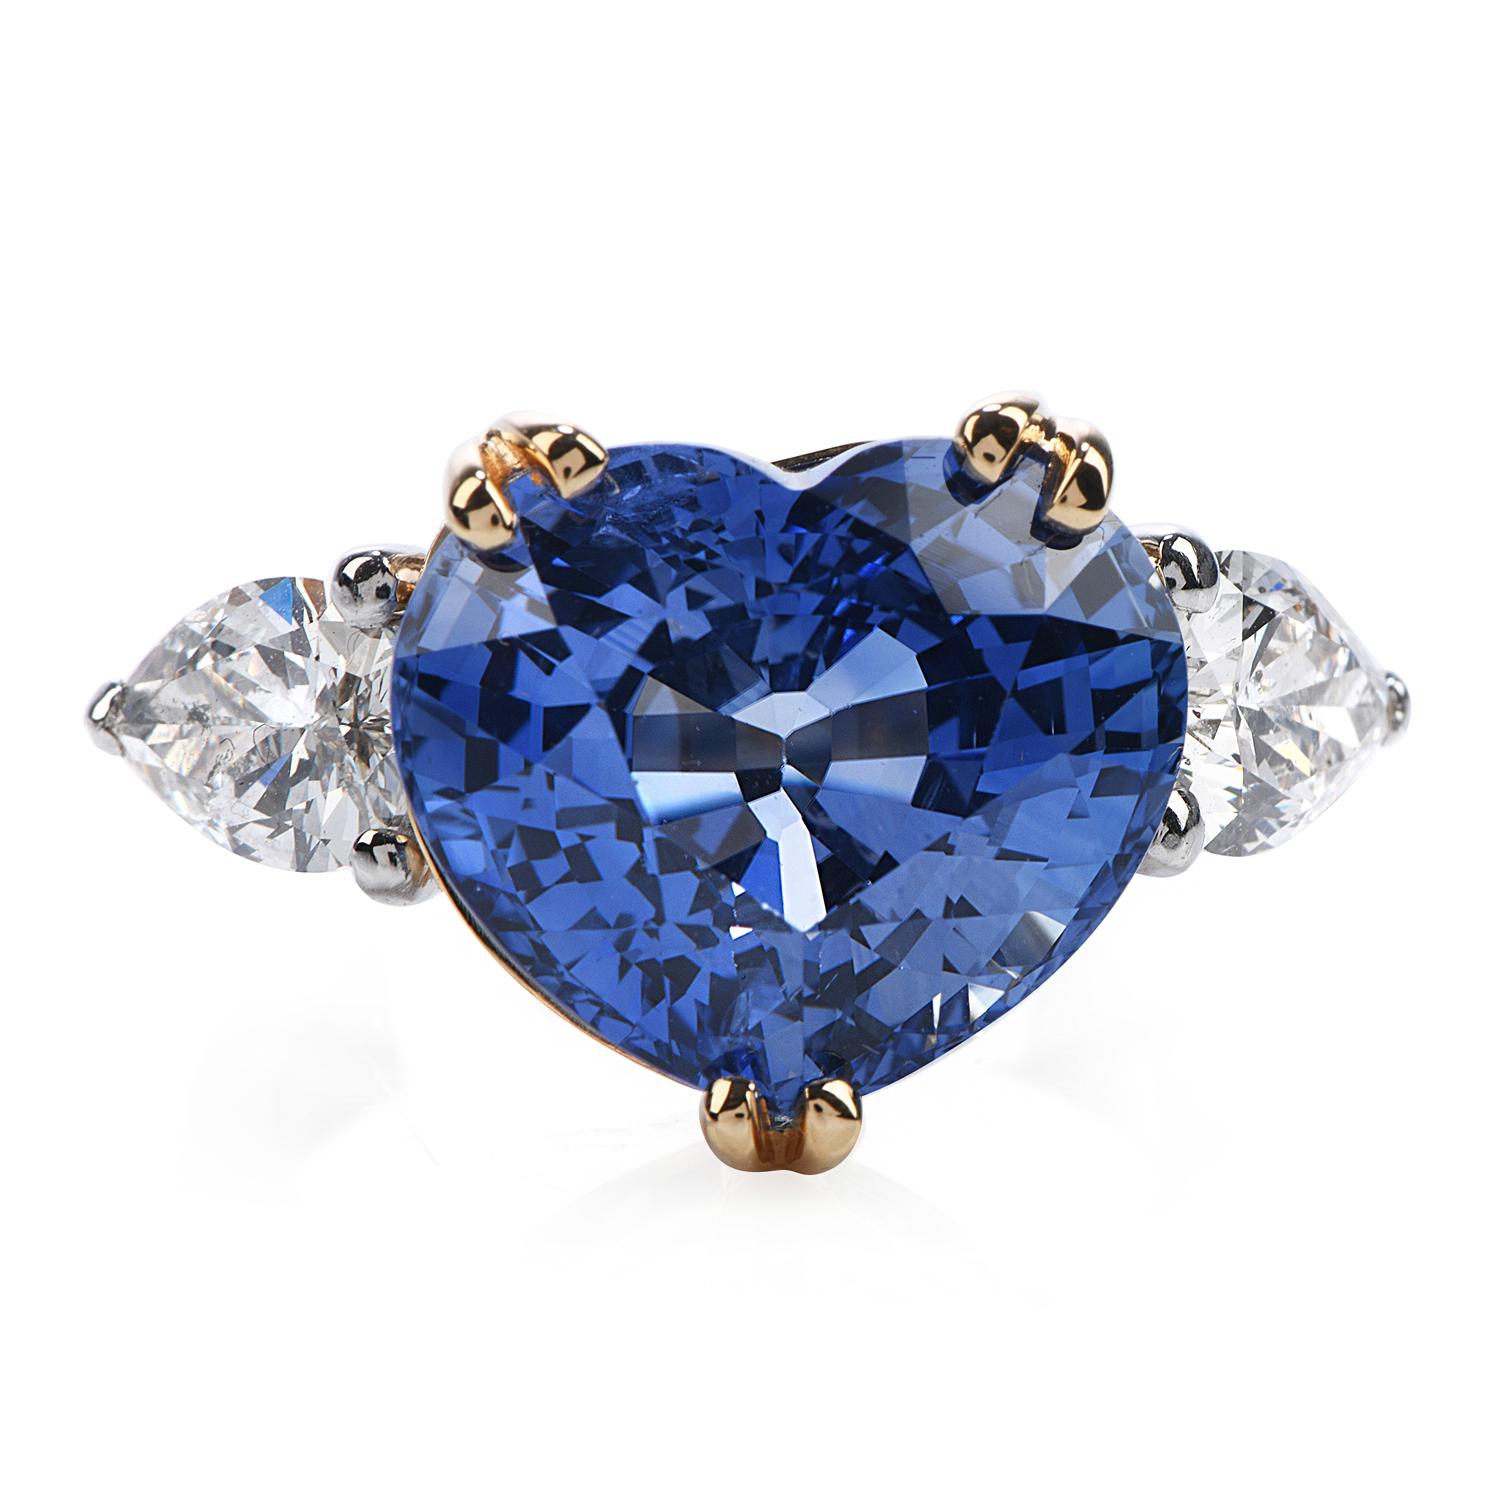 This classic three stone sapphire and diamond ring is hand crafted in solid platinum and 18k yellow gold. Exposing the center with a violet blue Natural corundom genuine blue heart shape sapphire, heated From Sri Lanka (Ceylon origin) weighing